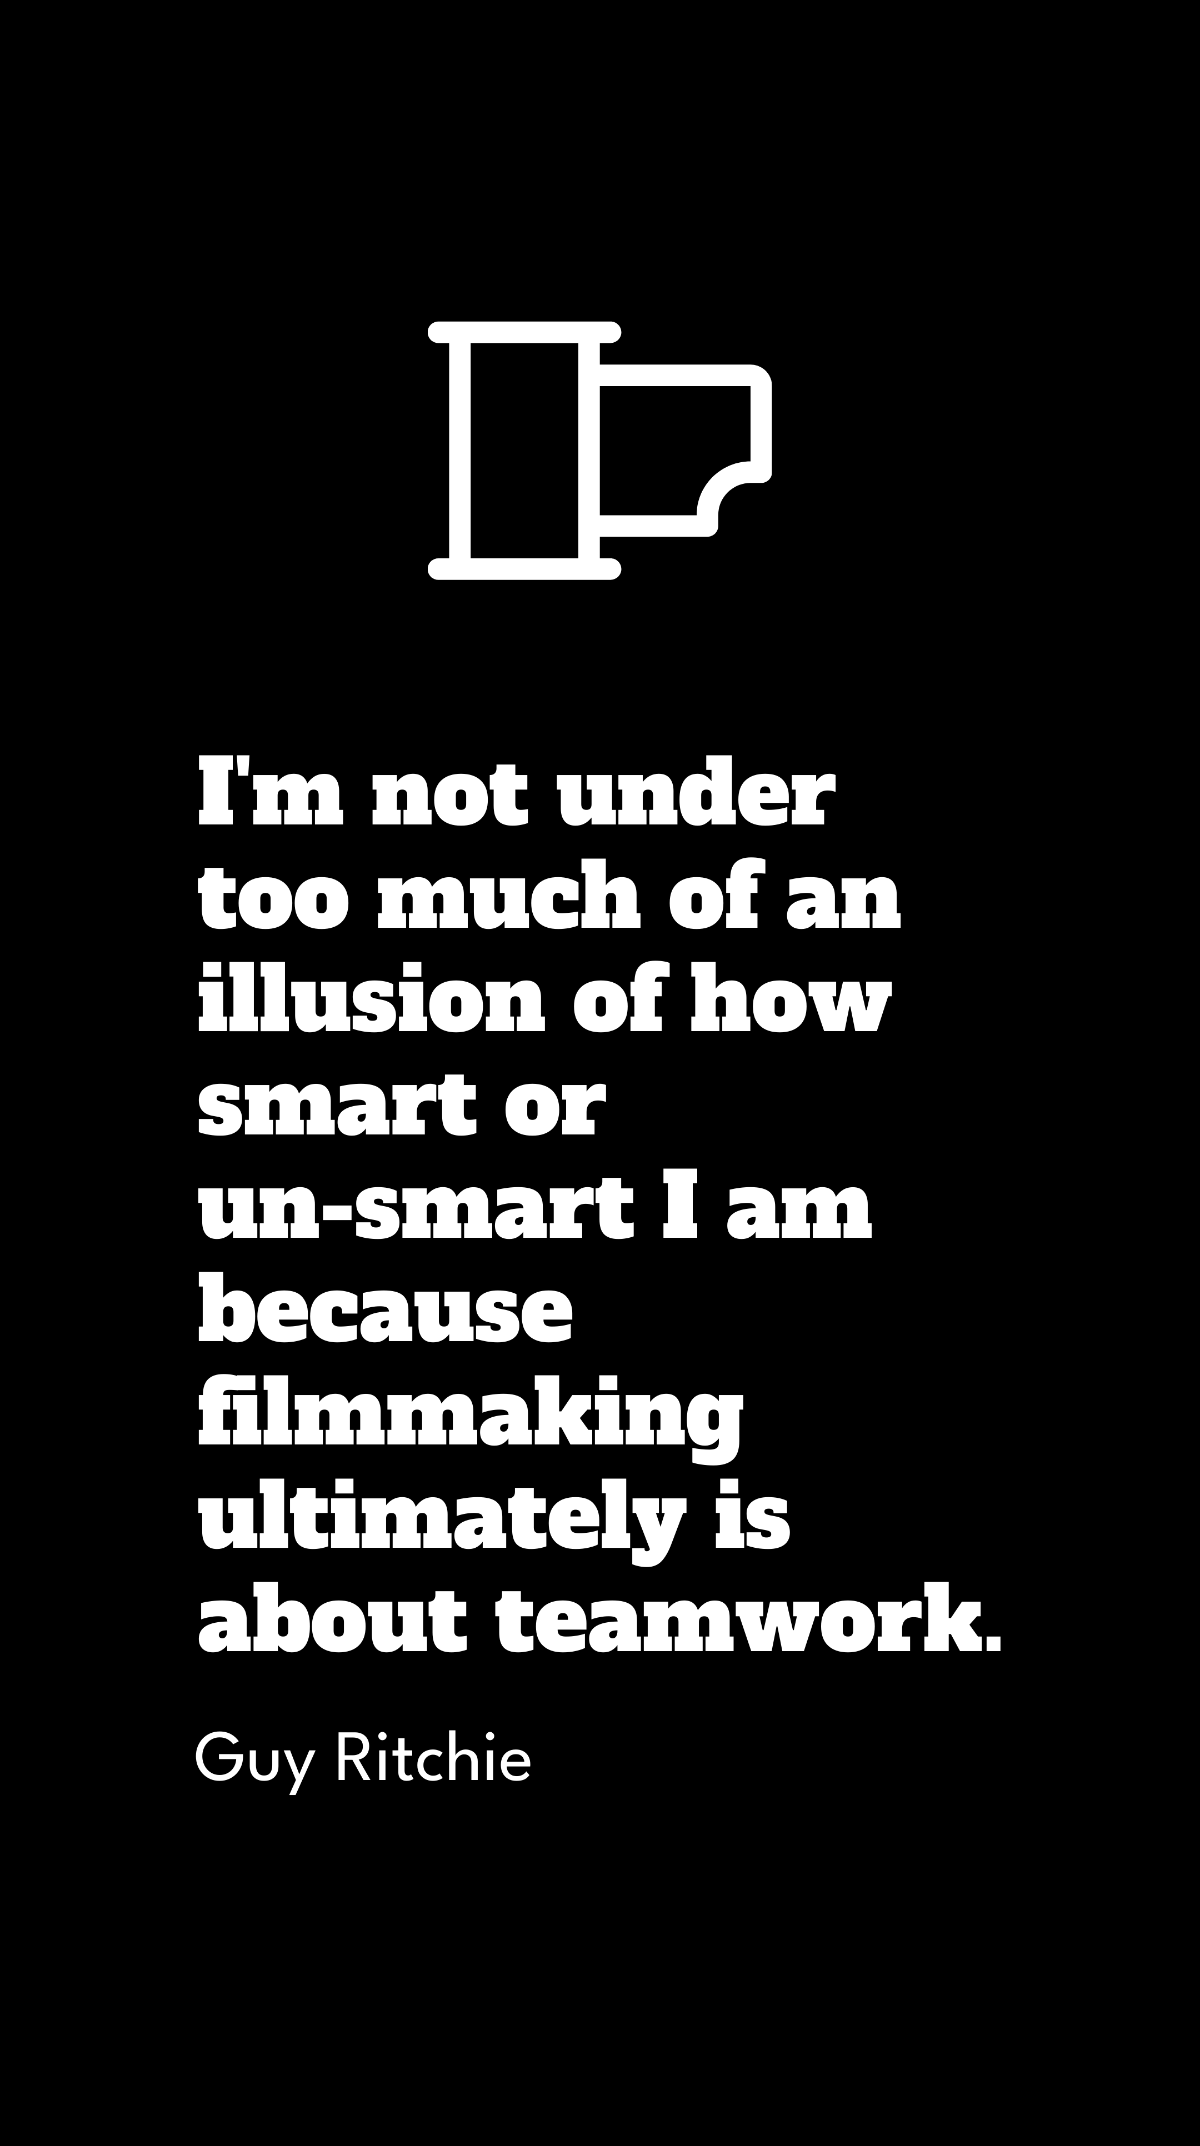 Guy Ritchie - I'm not under too much of an illusion of how smart or un-smart I am because filmmaking ultimately is about teamwork. Template